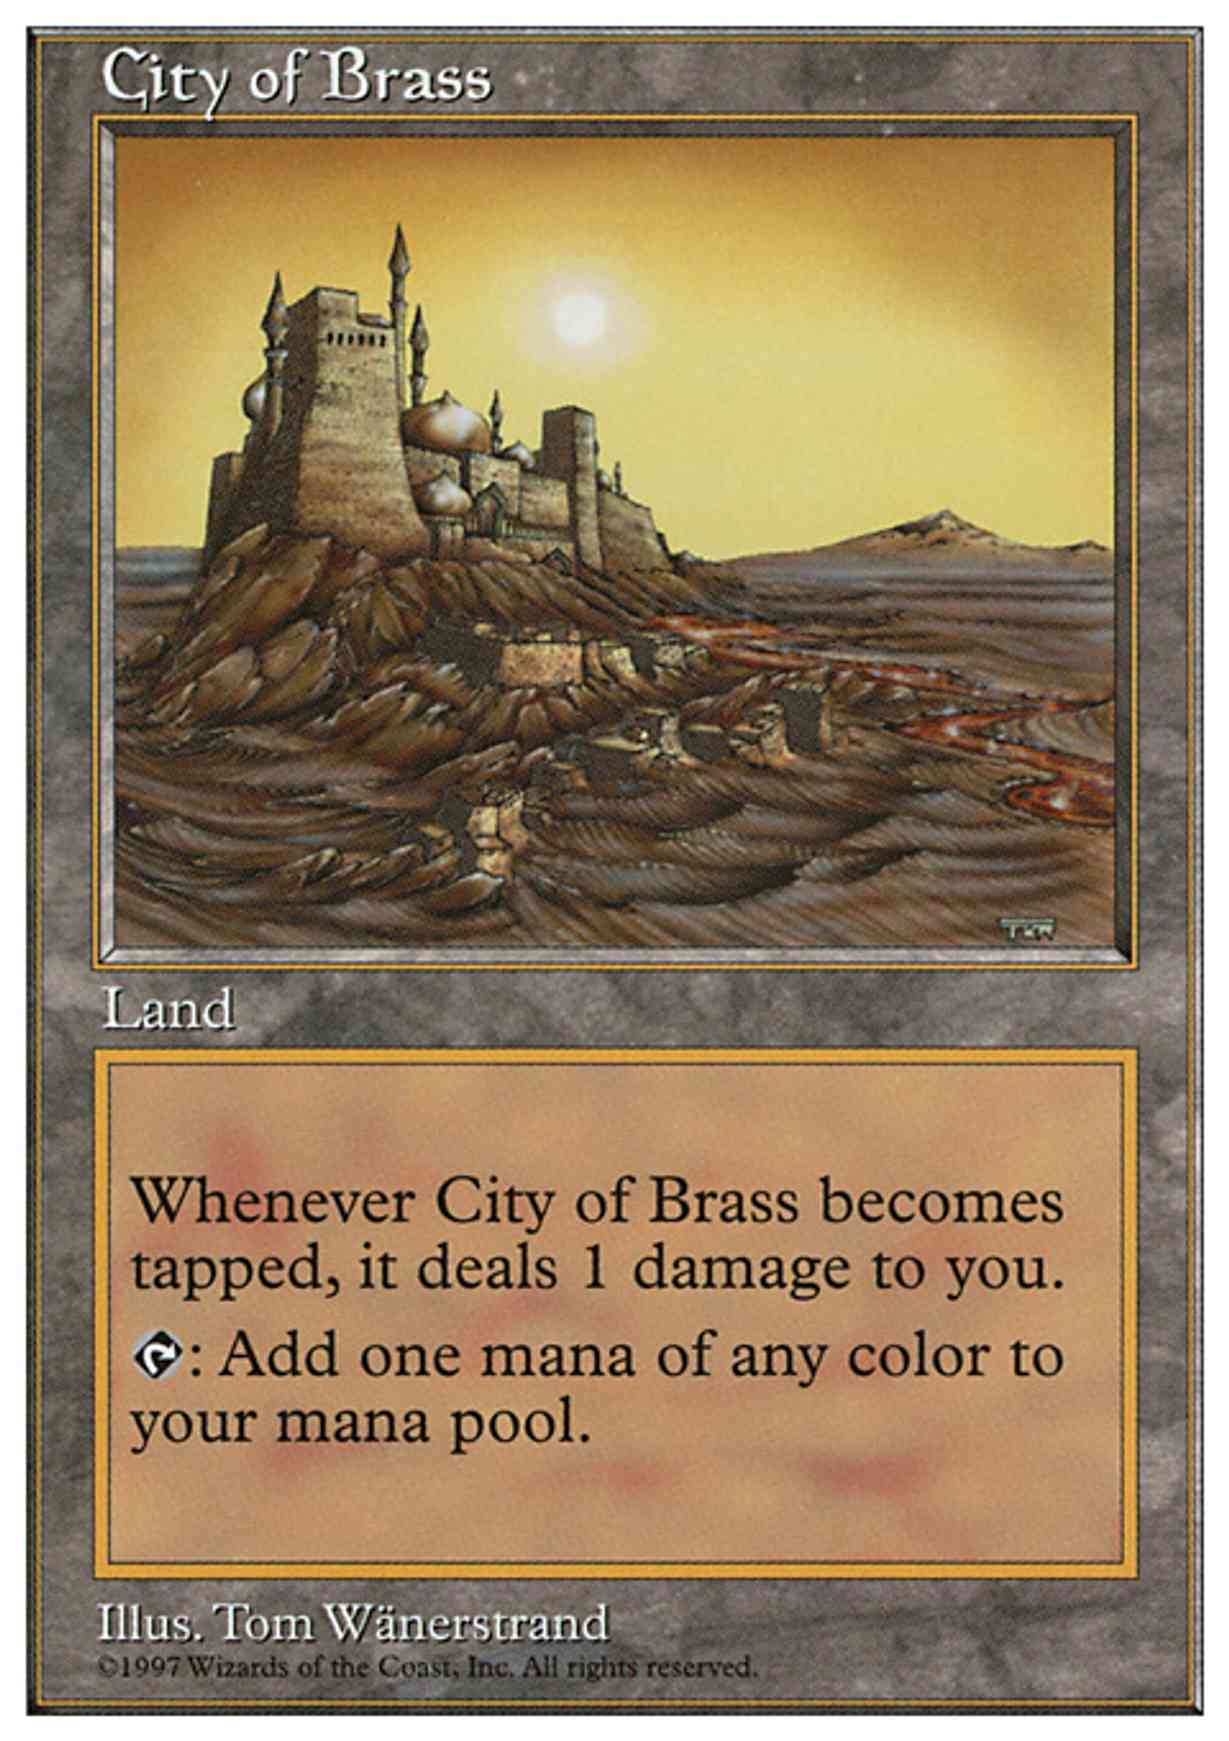 City of Brass magic card front